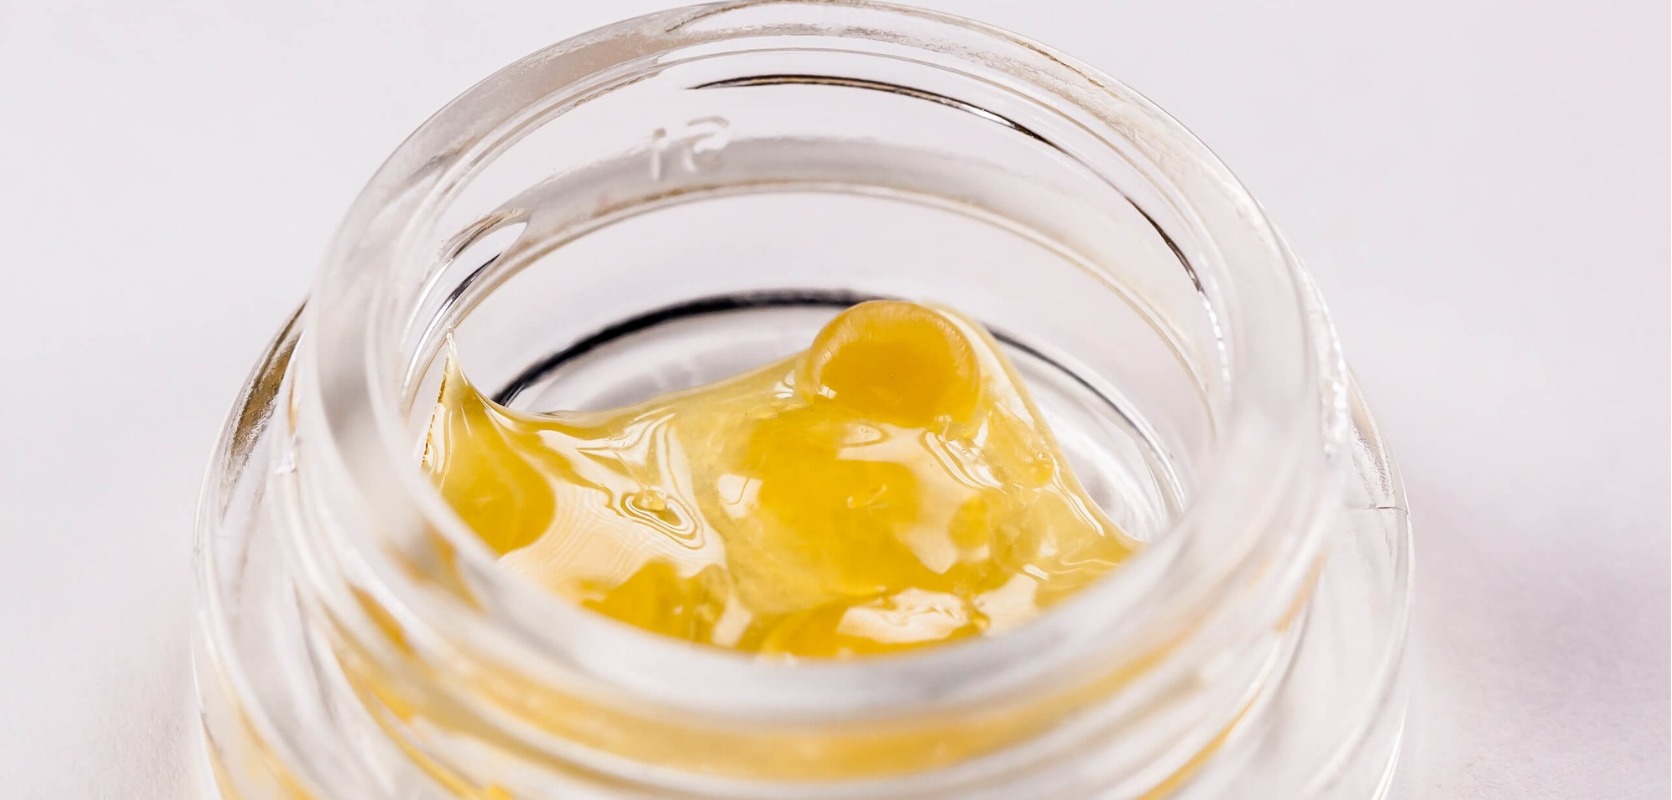 If you live in a warm climate, you’d want to consider keeping your THC shatter weed in a refrigerator. 